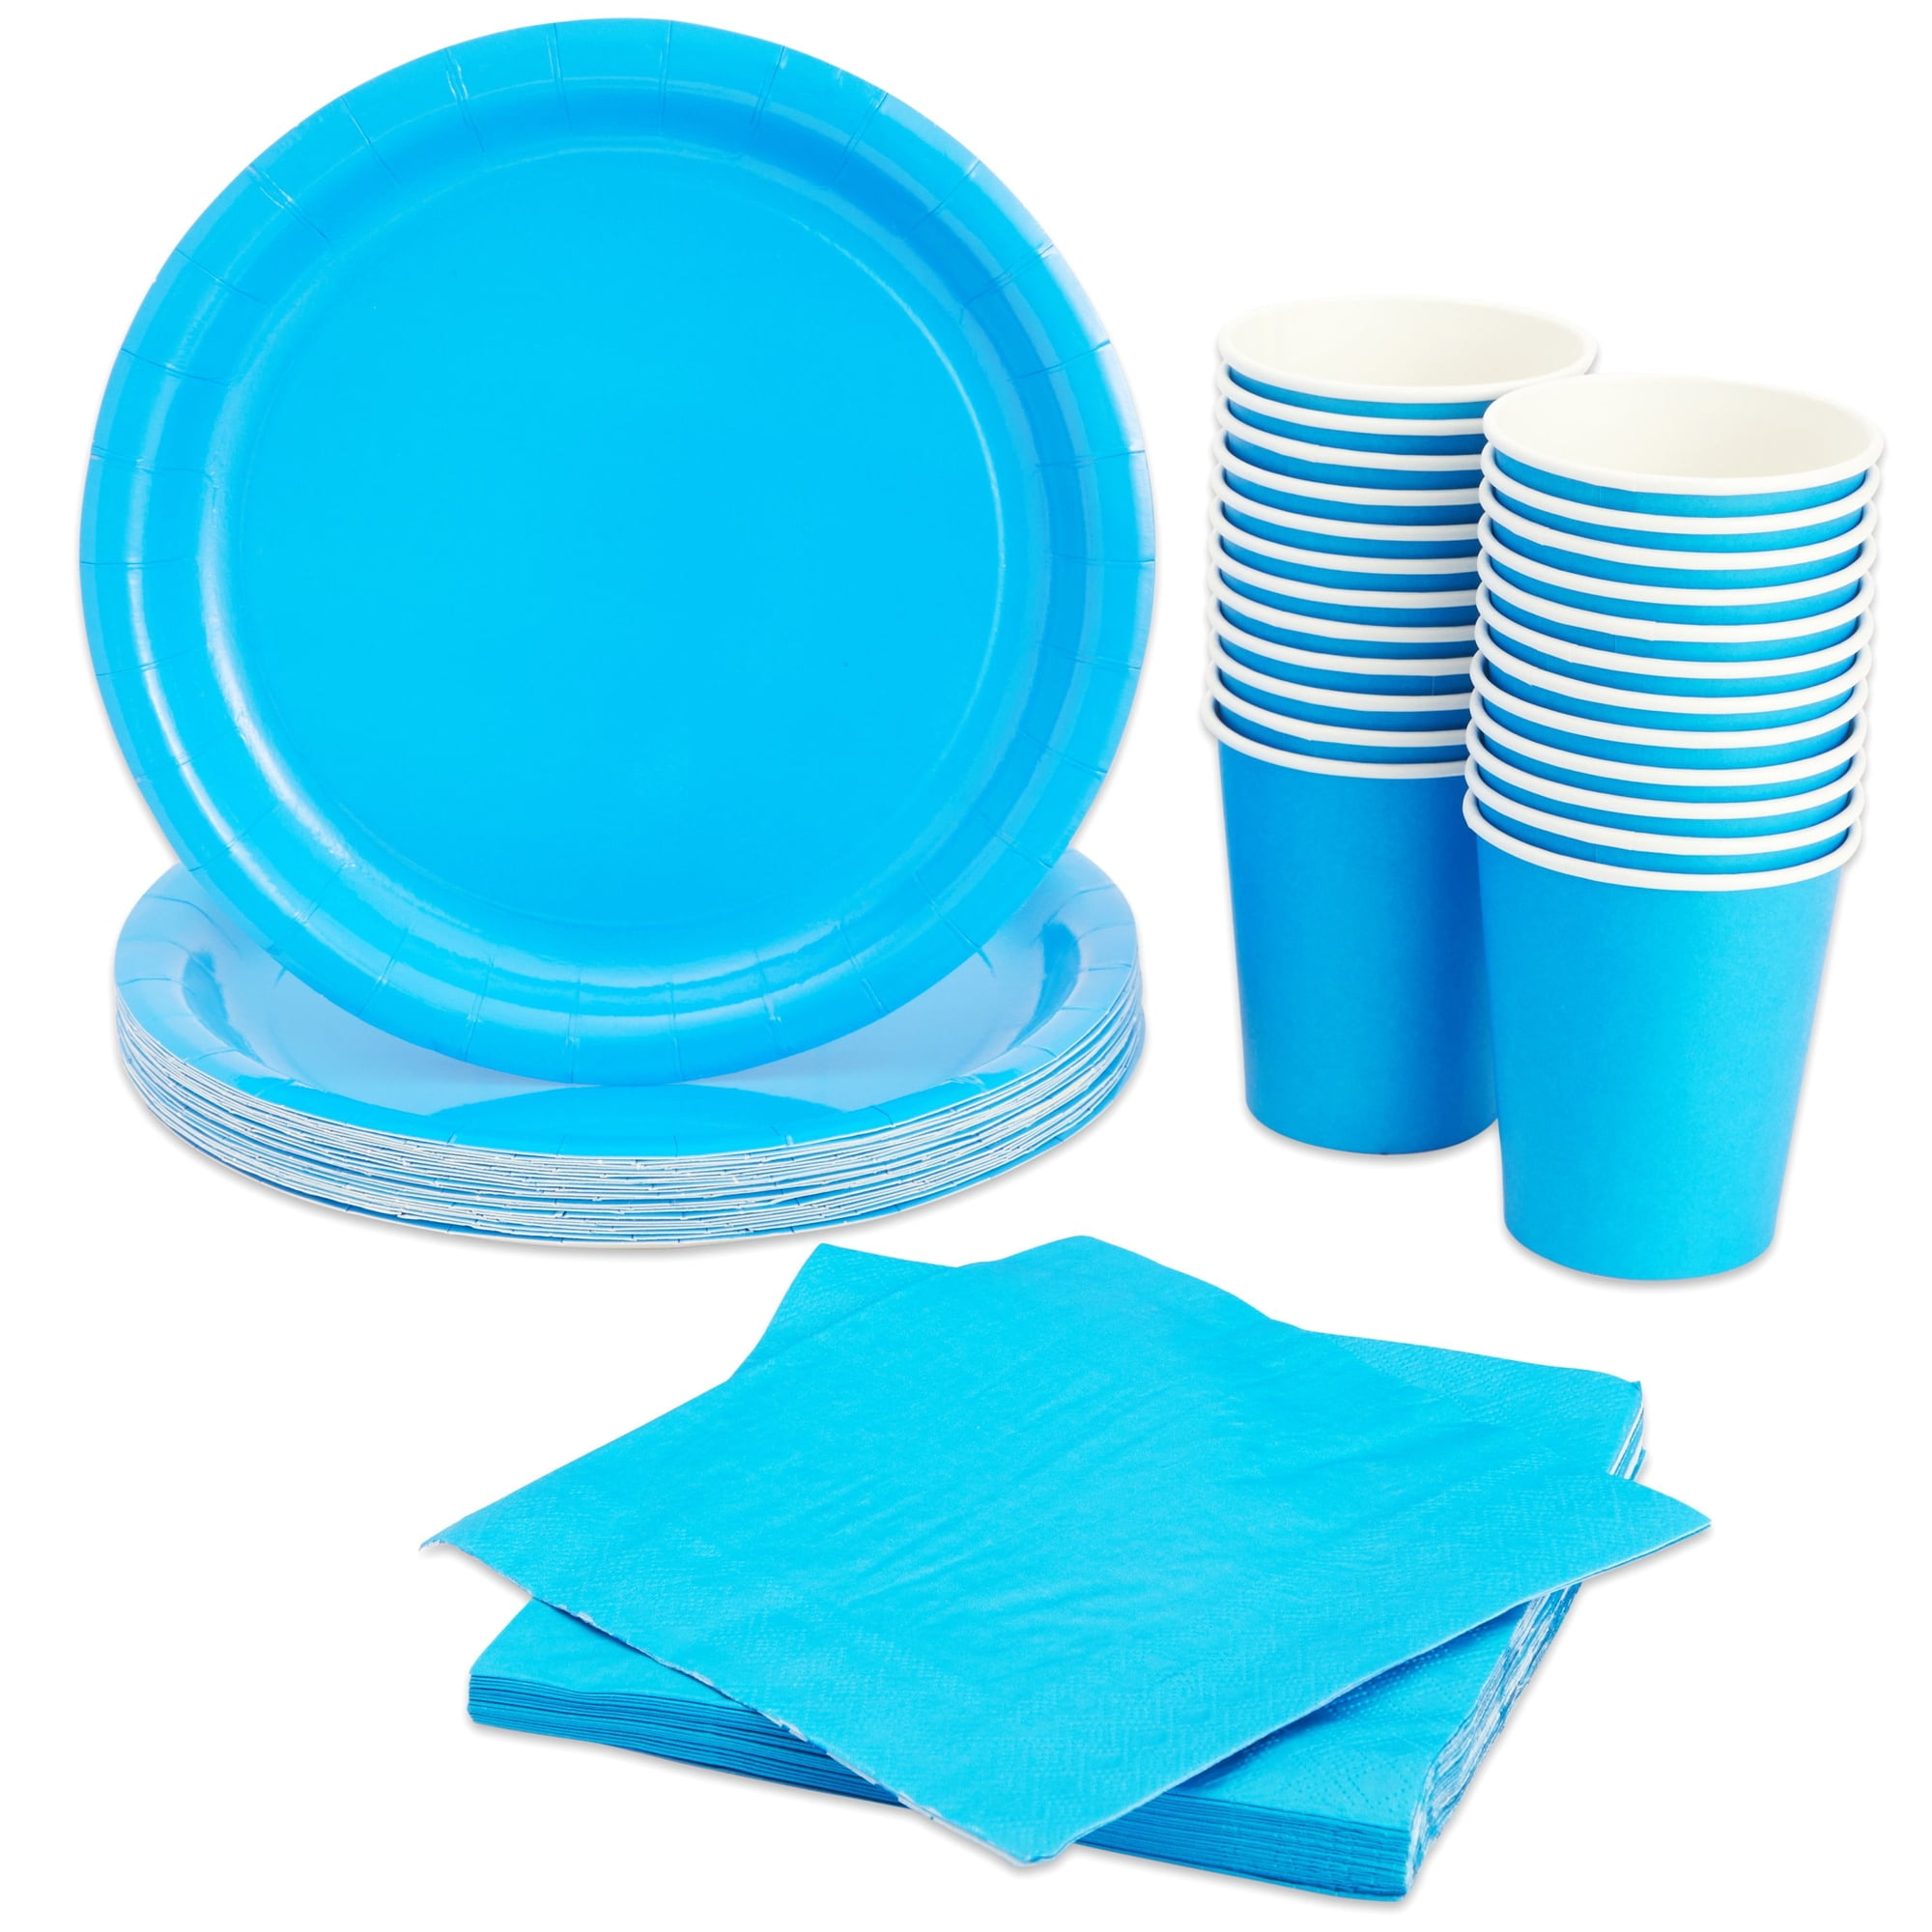 Simply Done Party Plastic Cup 18 Oz, Tableware & Serveware